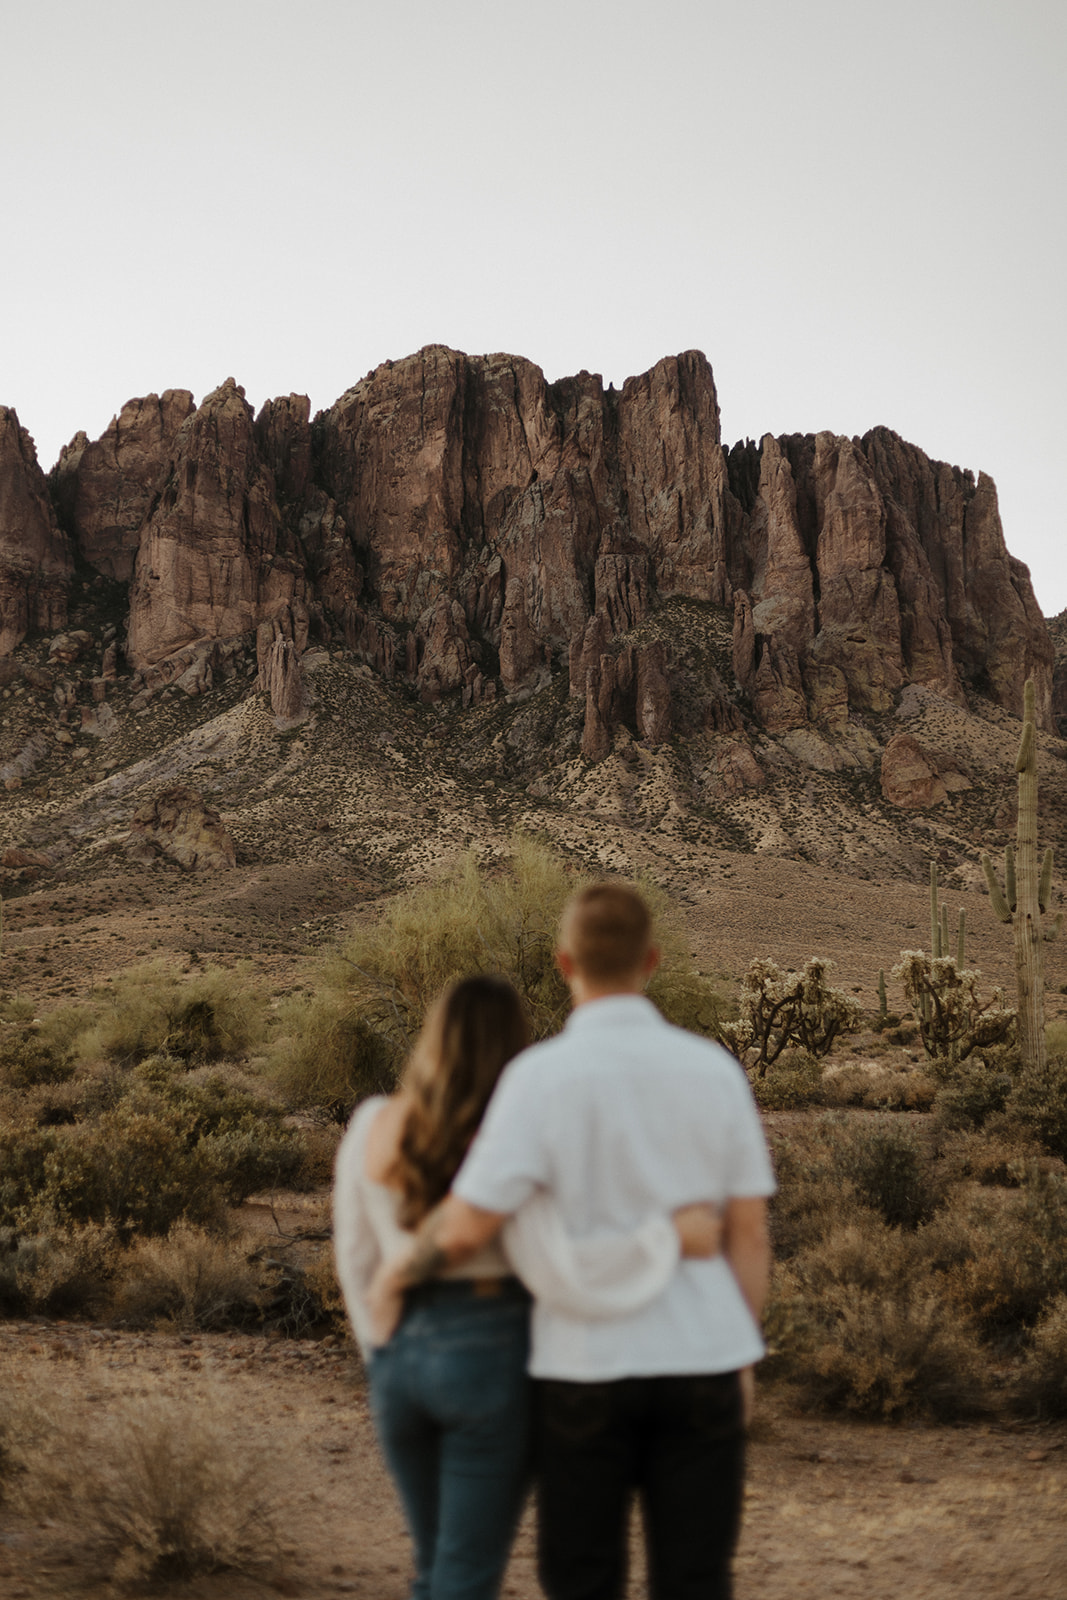 couple blurred out with cacti and desert landscape background in focus during sunrise session at lost dutchman state park in az